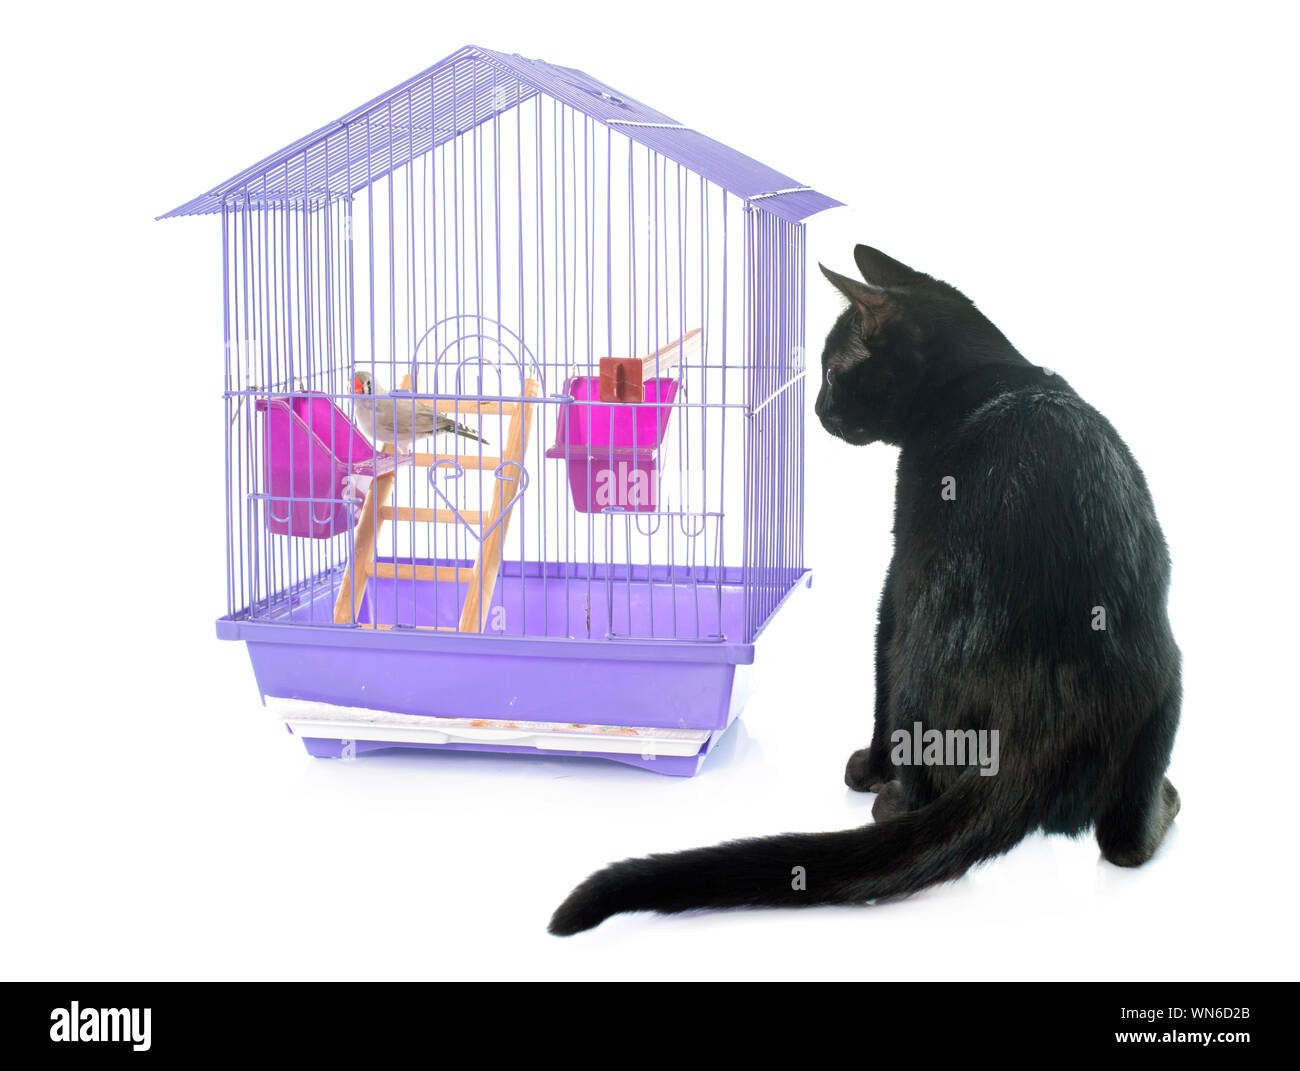 Cat Looking At Bird Perching In Birdcage Against White Background Stock Photo